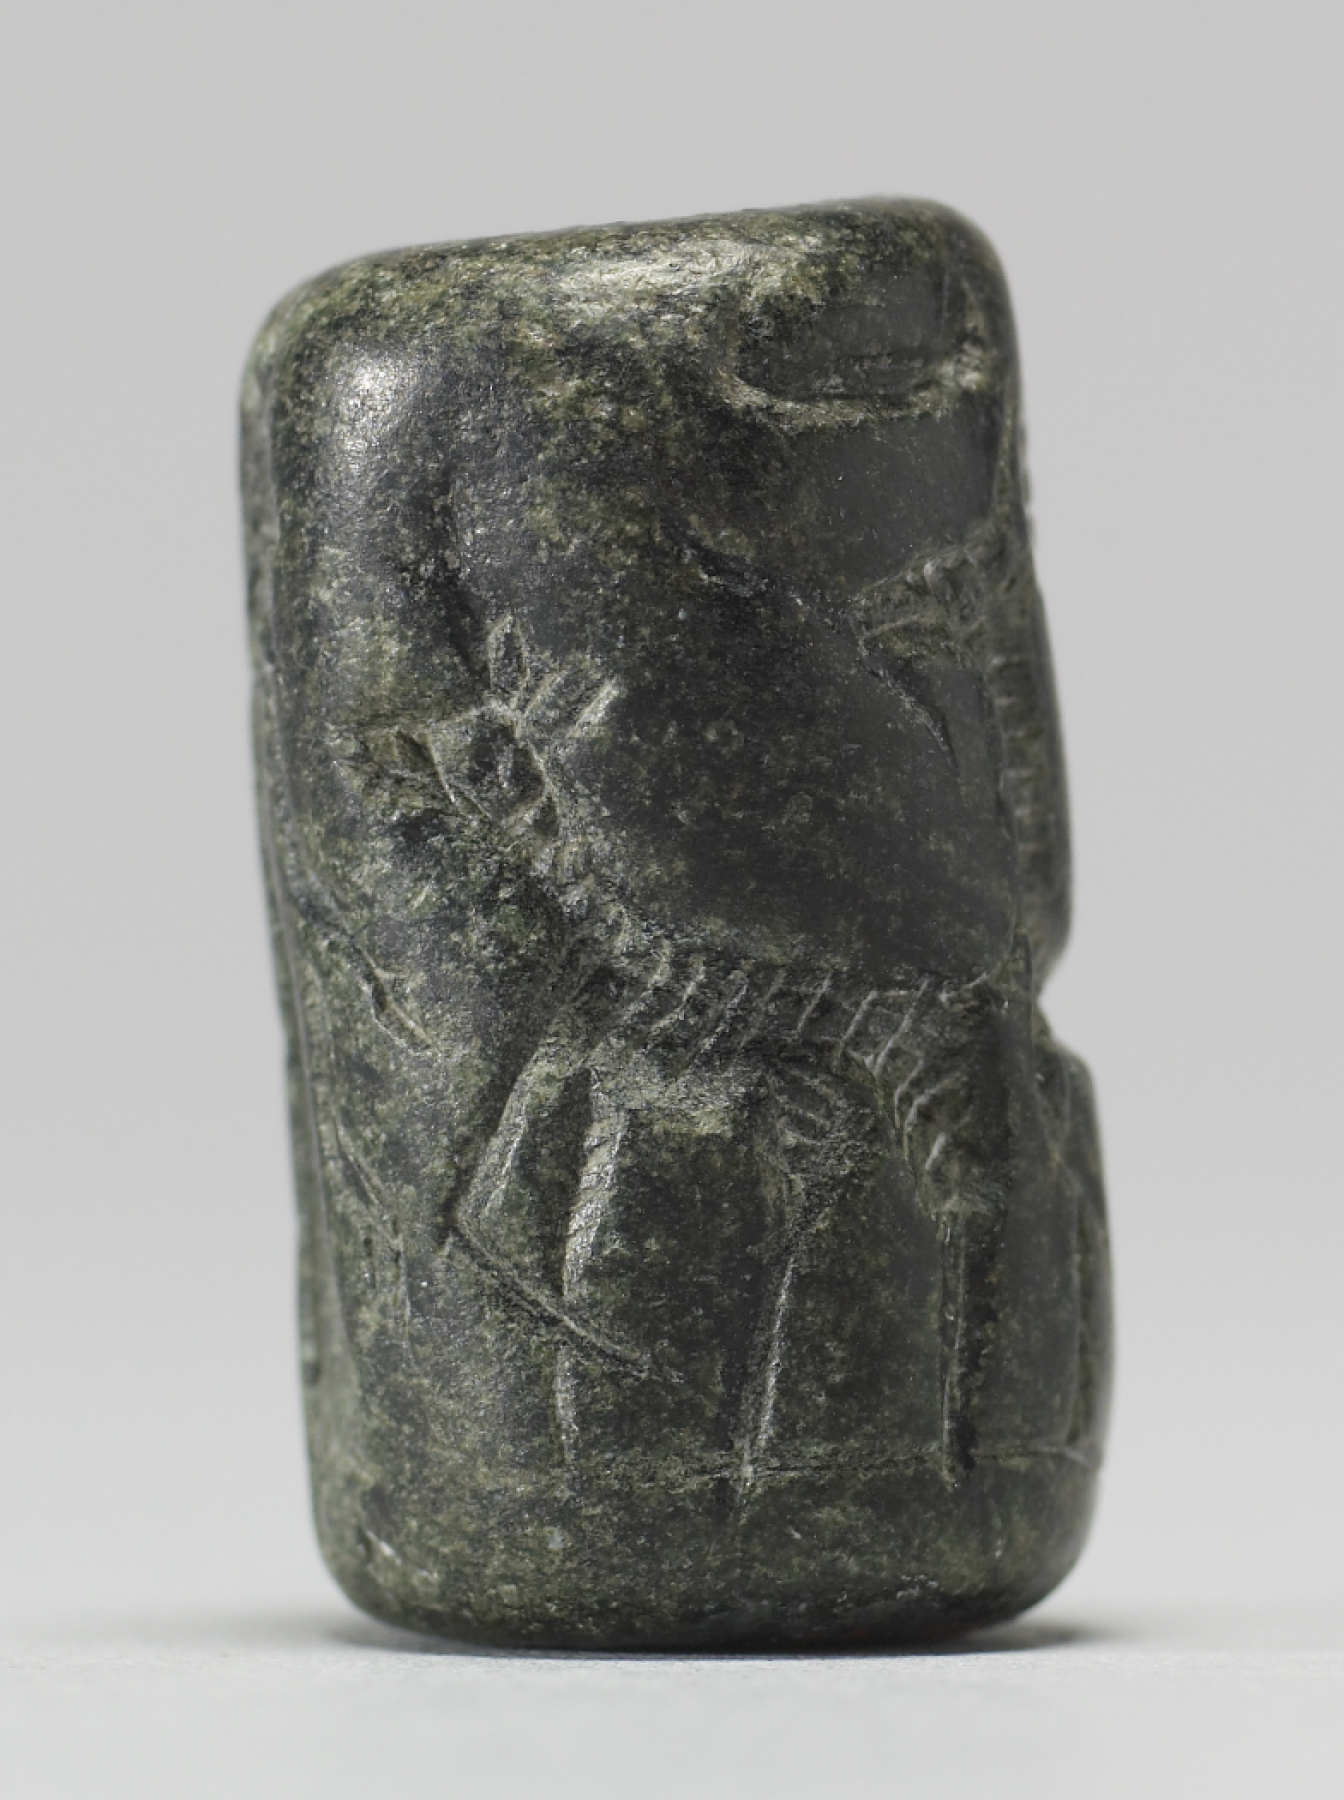 Image for Cylinder Seal with a Figure, Animals, and an Inscription